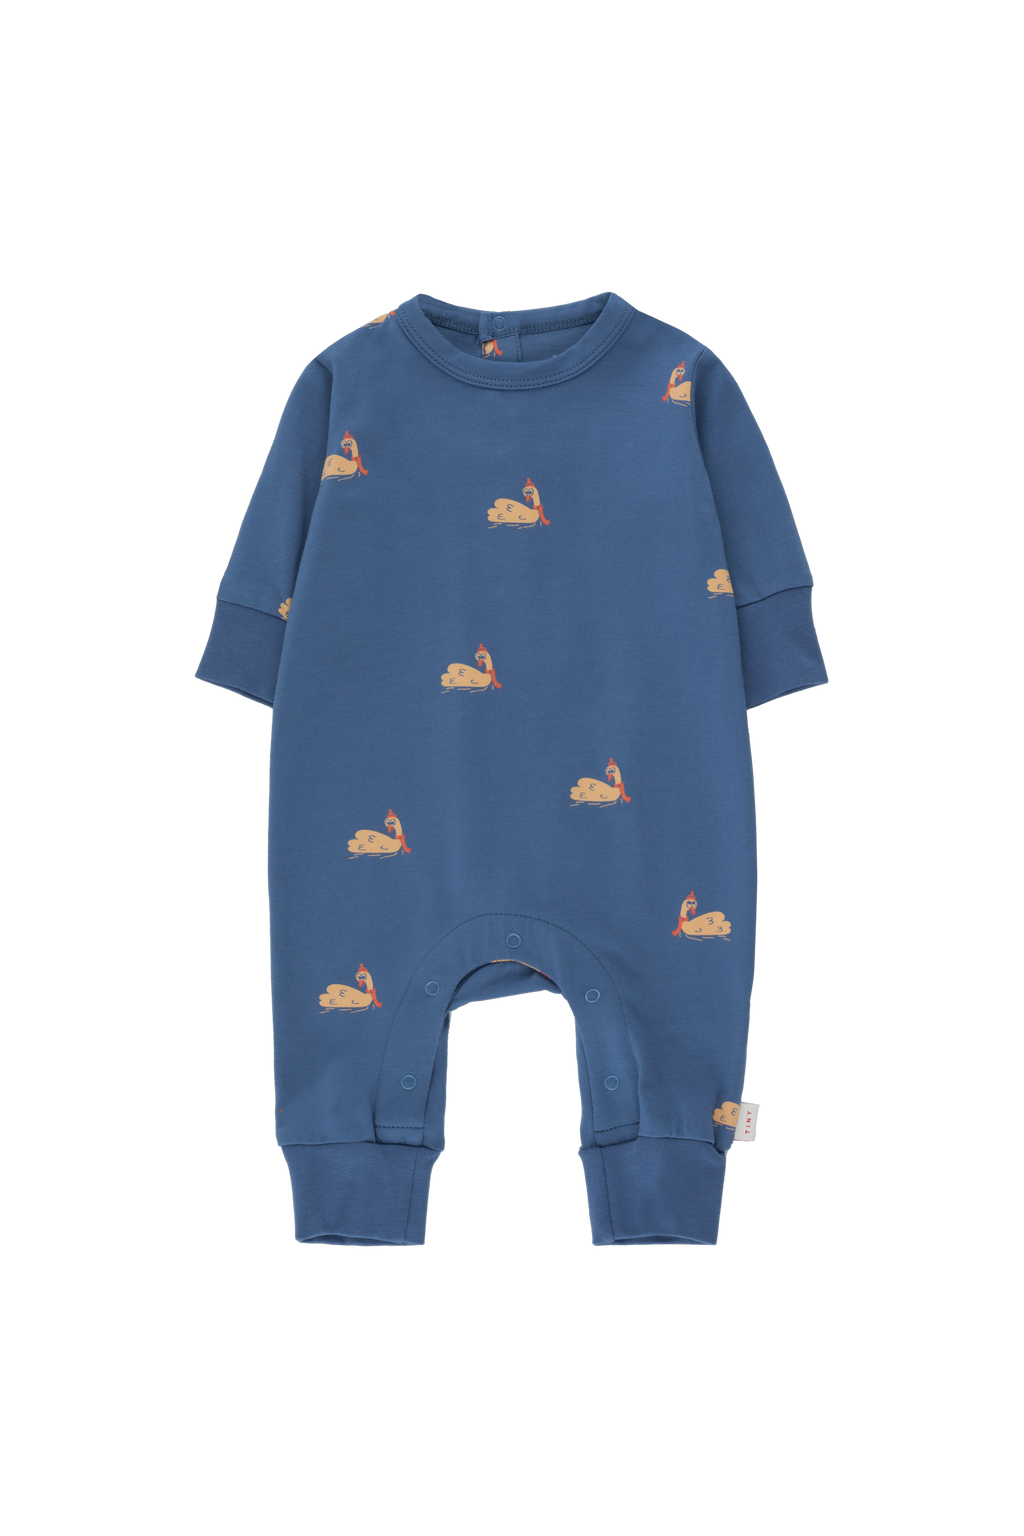 Tiny Cottons Swans One Piece - Soft Blue/Toffee